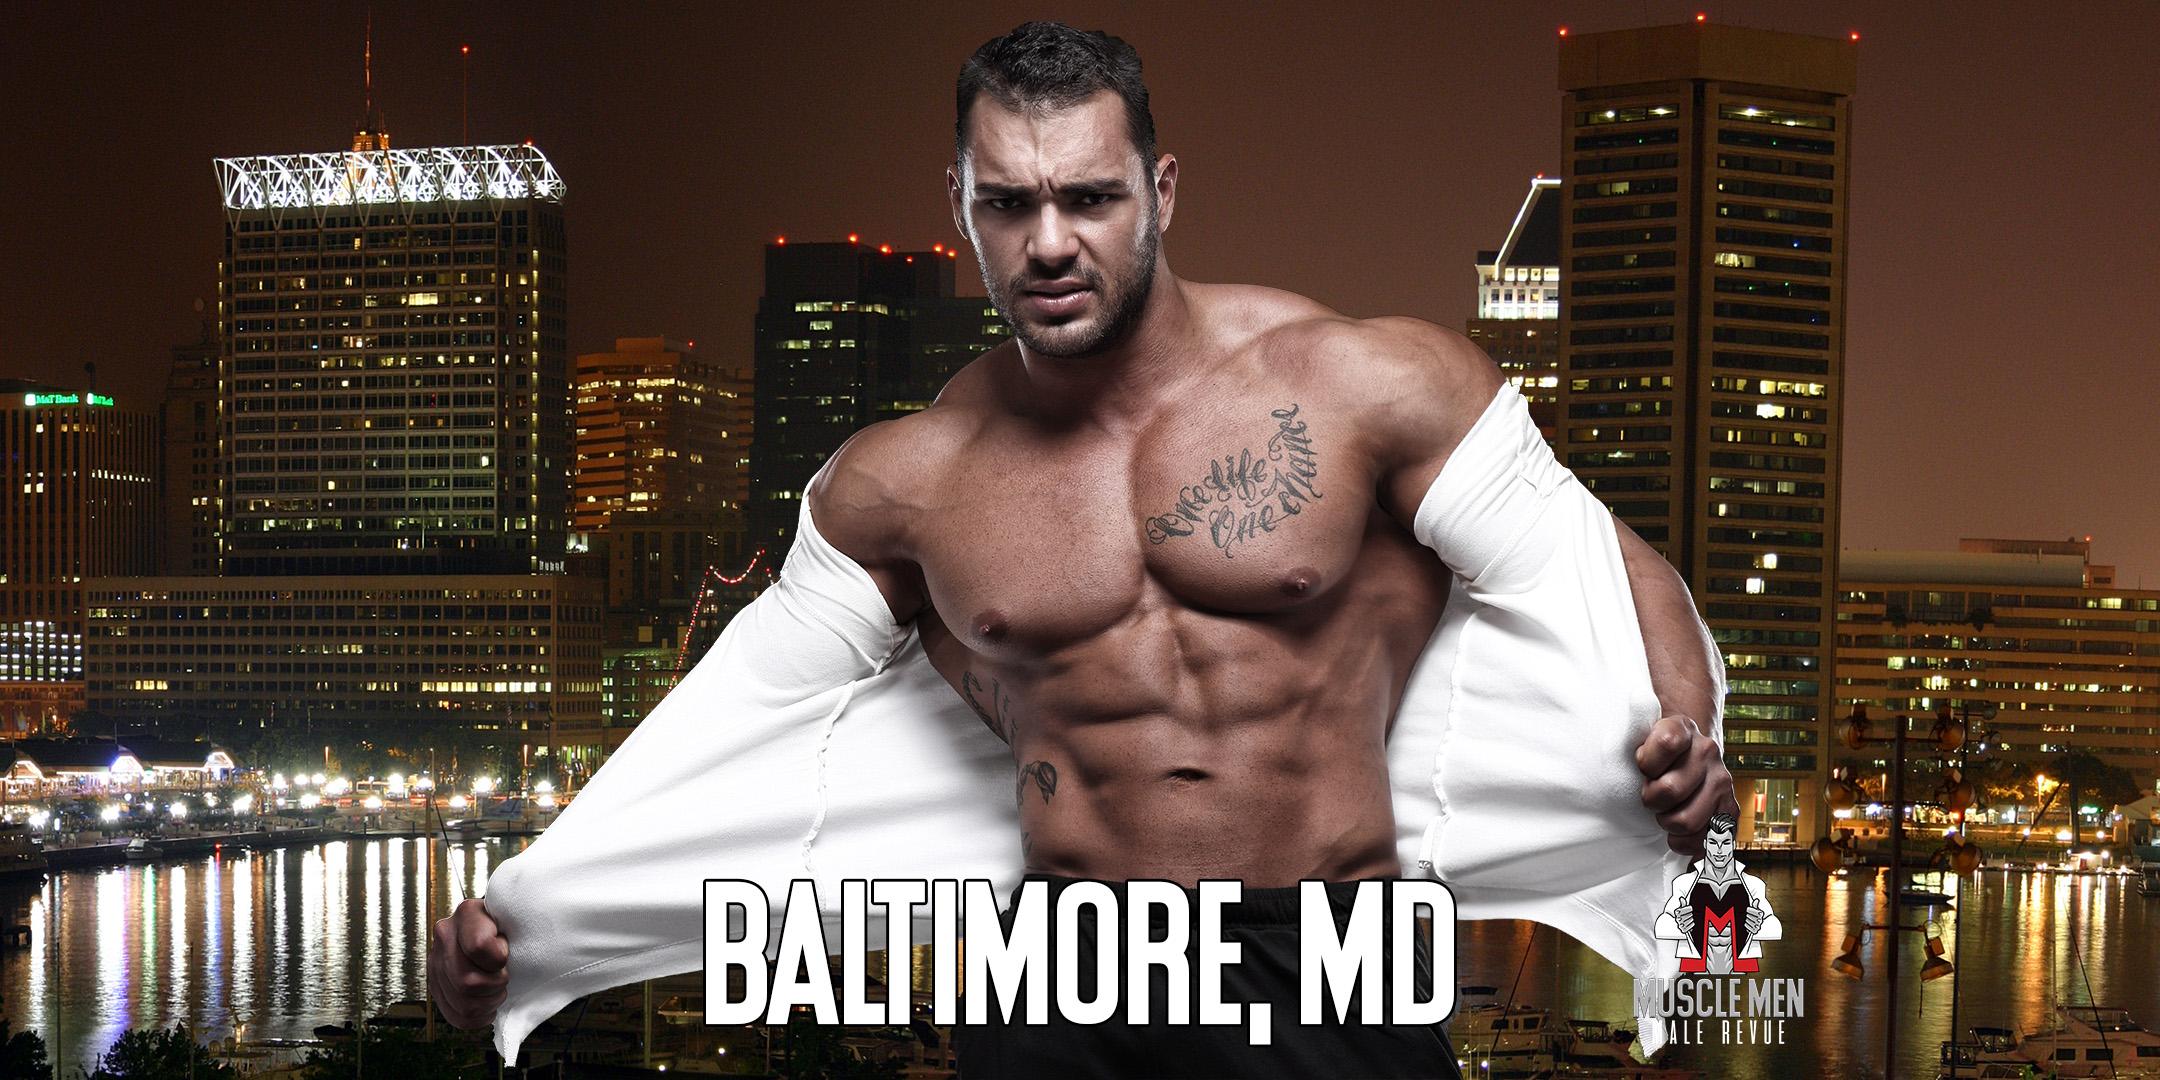 Muscle Men Male Strippers Revue & Male Strip Club Shows Baltimore MD - 8PM to10 PM